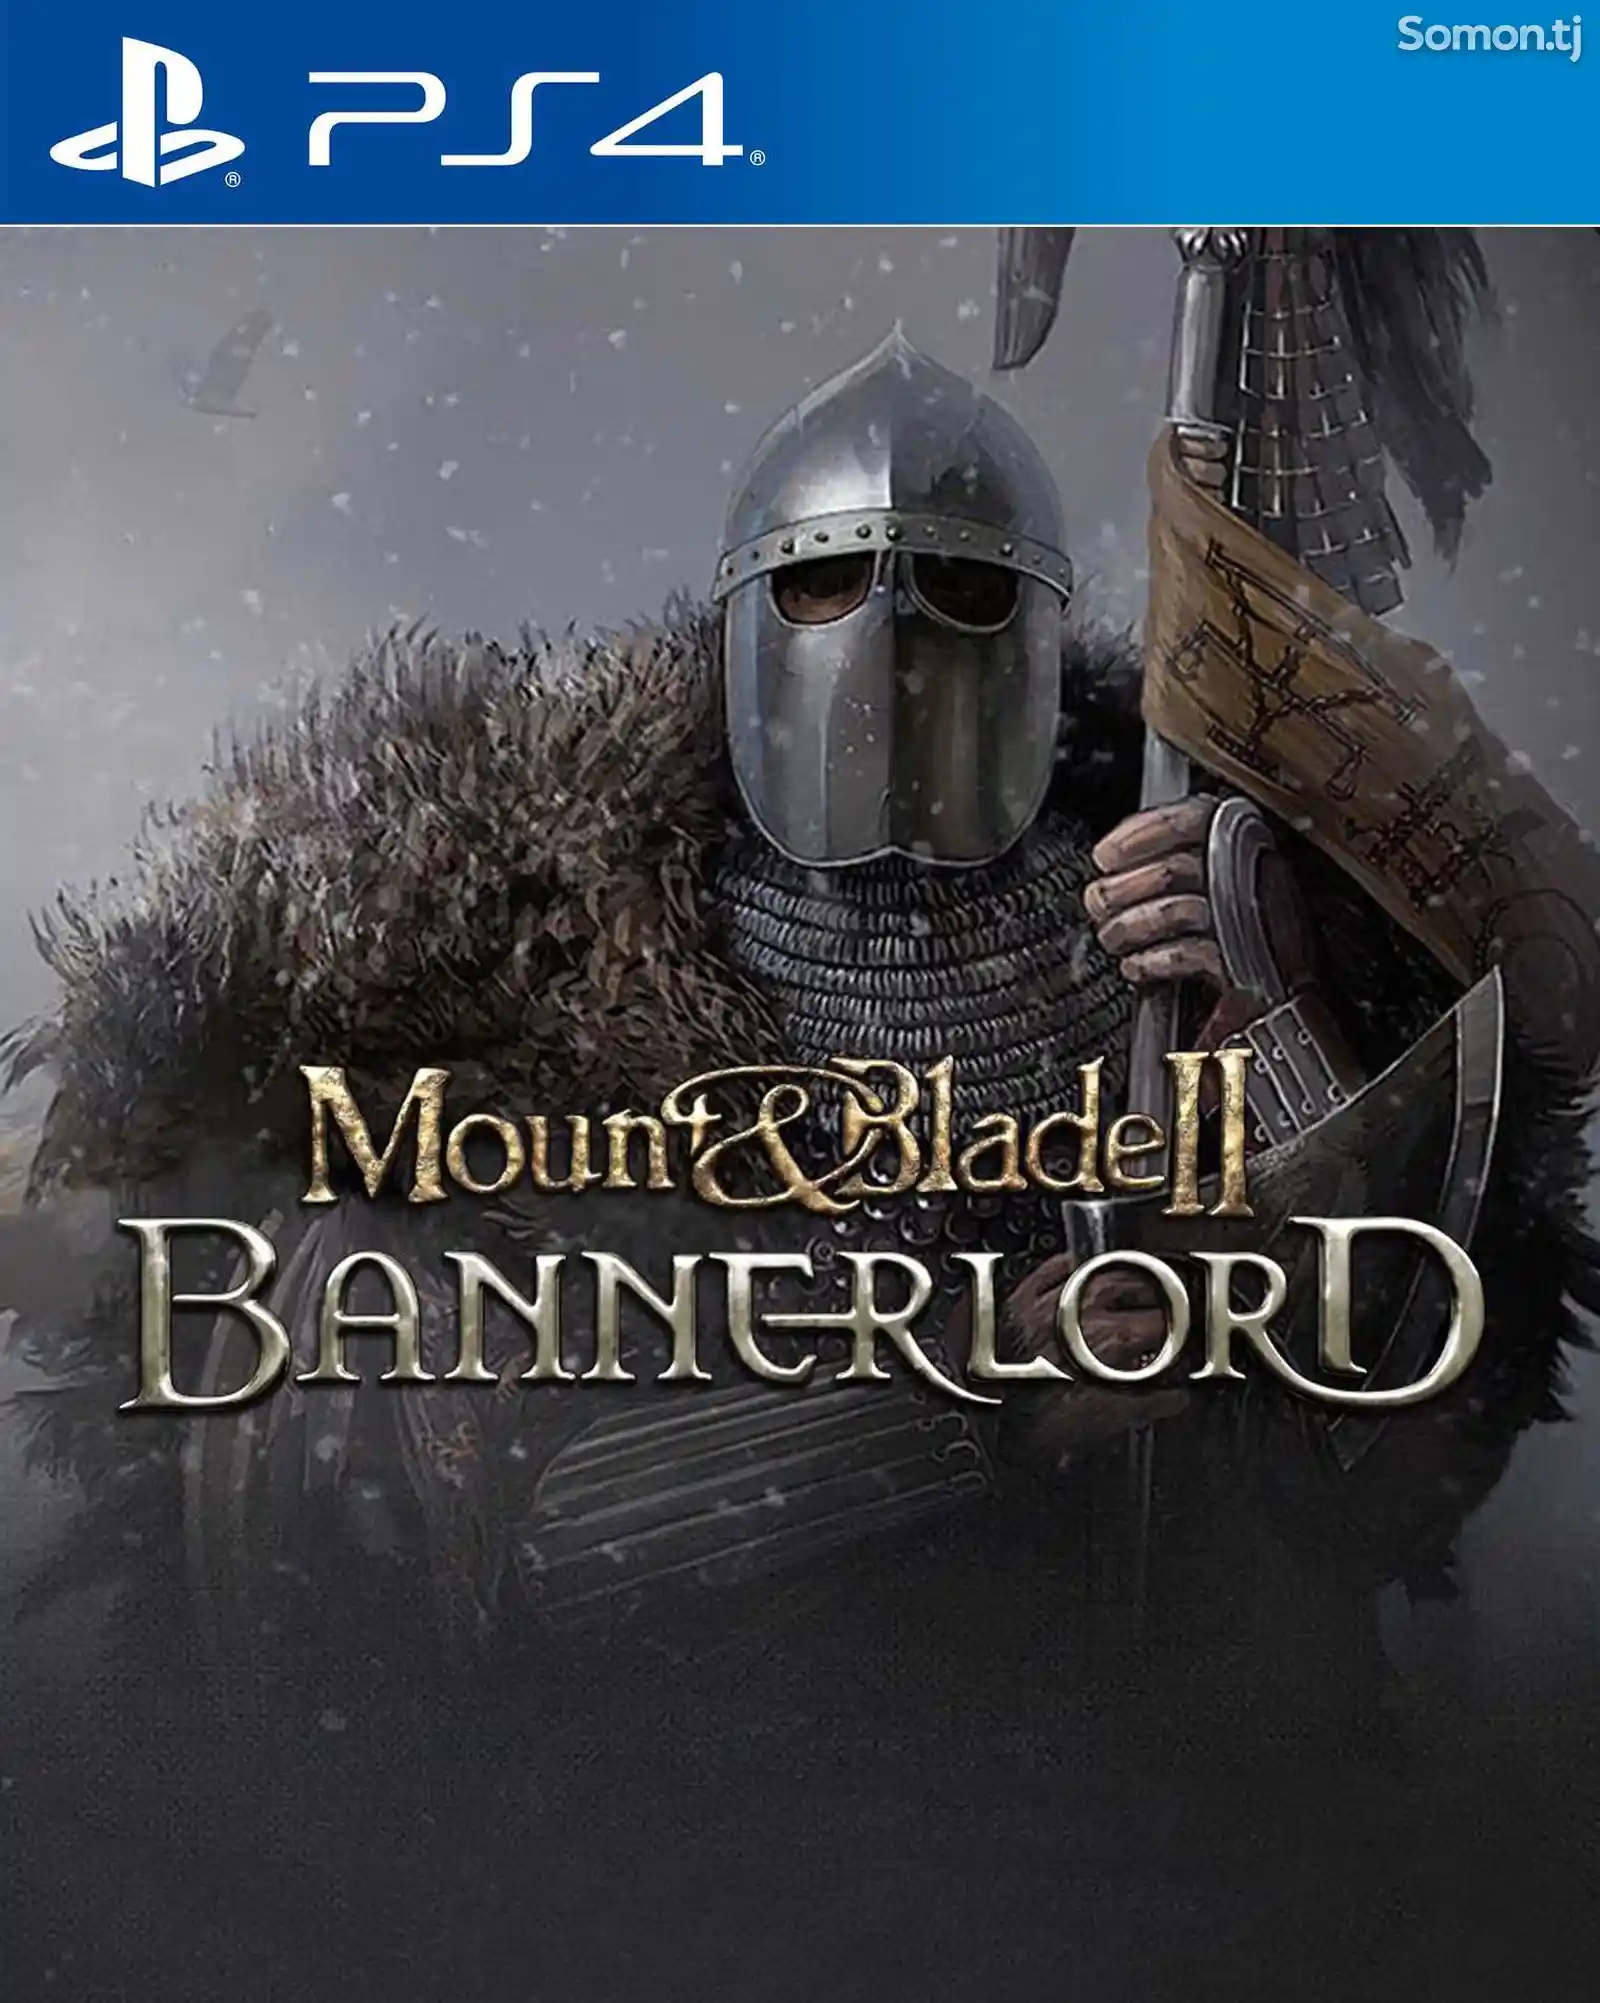 Игра Mount and blade 2 bannerlord для PS-4 / 5.05 / 6.72 / 7.02 / 7.55 / 9.00 /-1